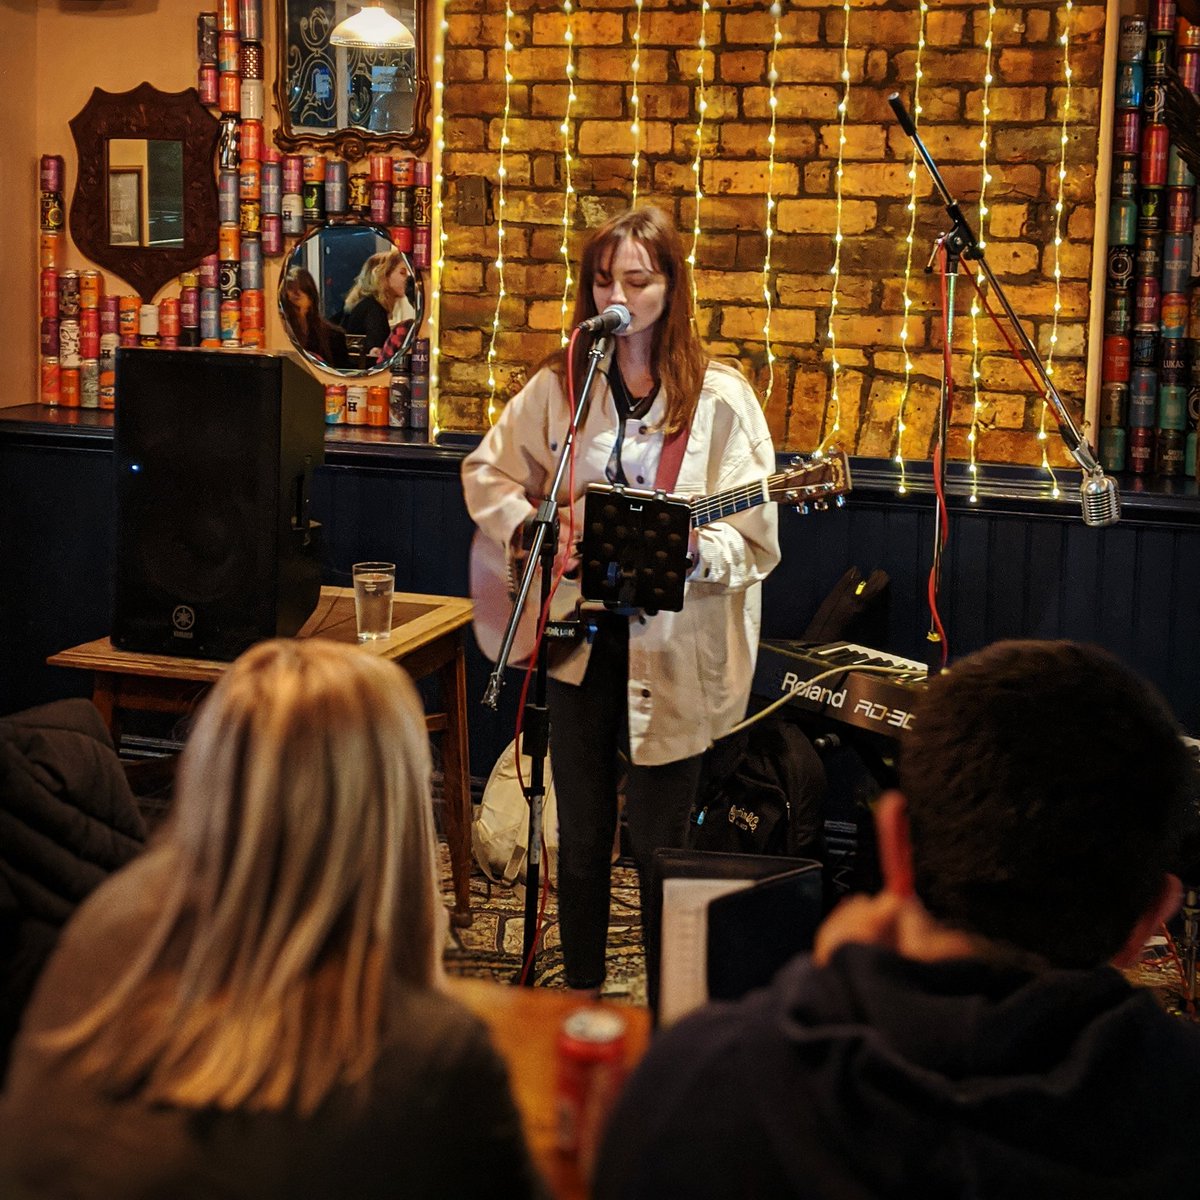 The Eagle Sheffield On Twitter Tonight S Live Music Is Now A Go Beginning With The Gorgeous Tones Of Anya Lace Saturdaynight Supportlivemusic Livemusic Music Gigs Livevenue Folk Americana Acoustic Musician Guitar